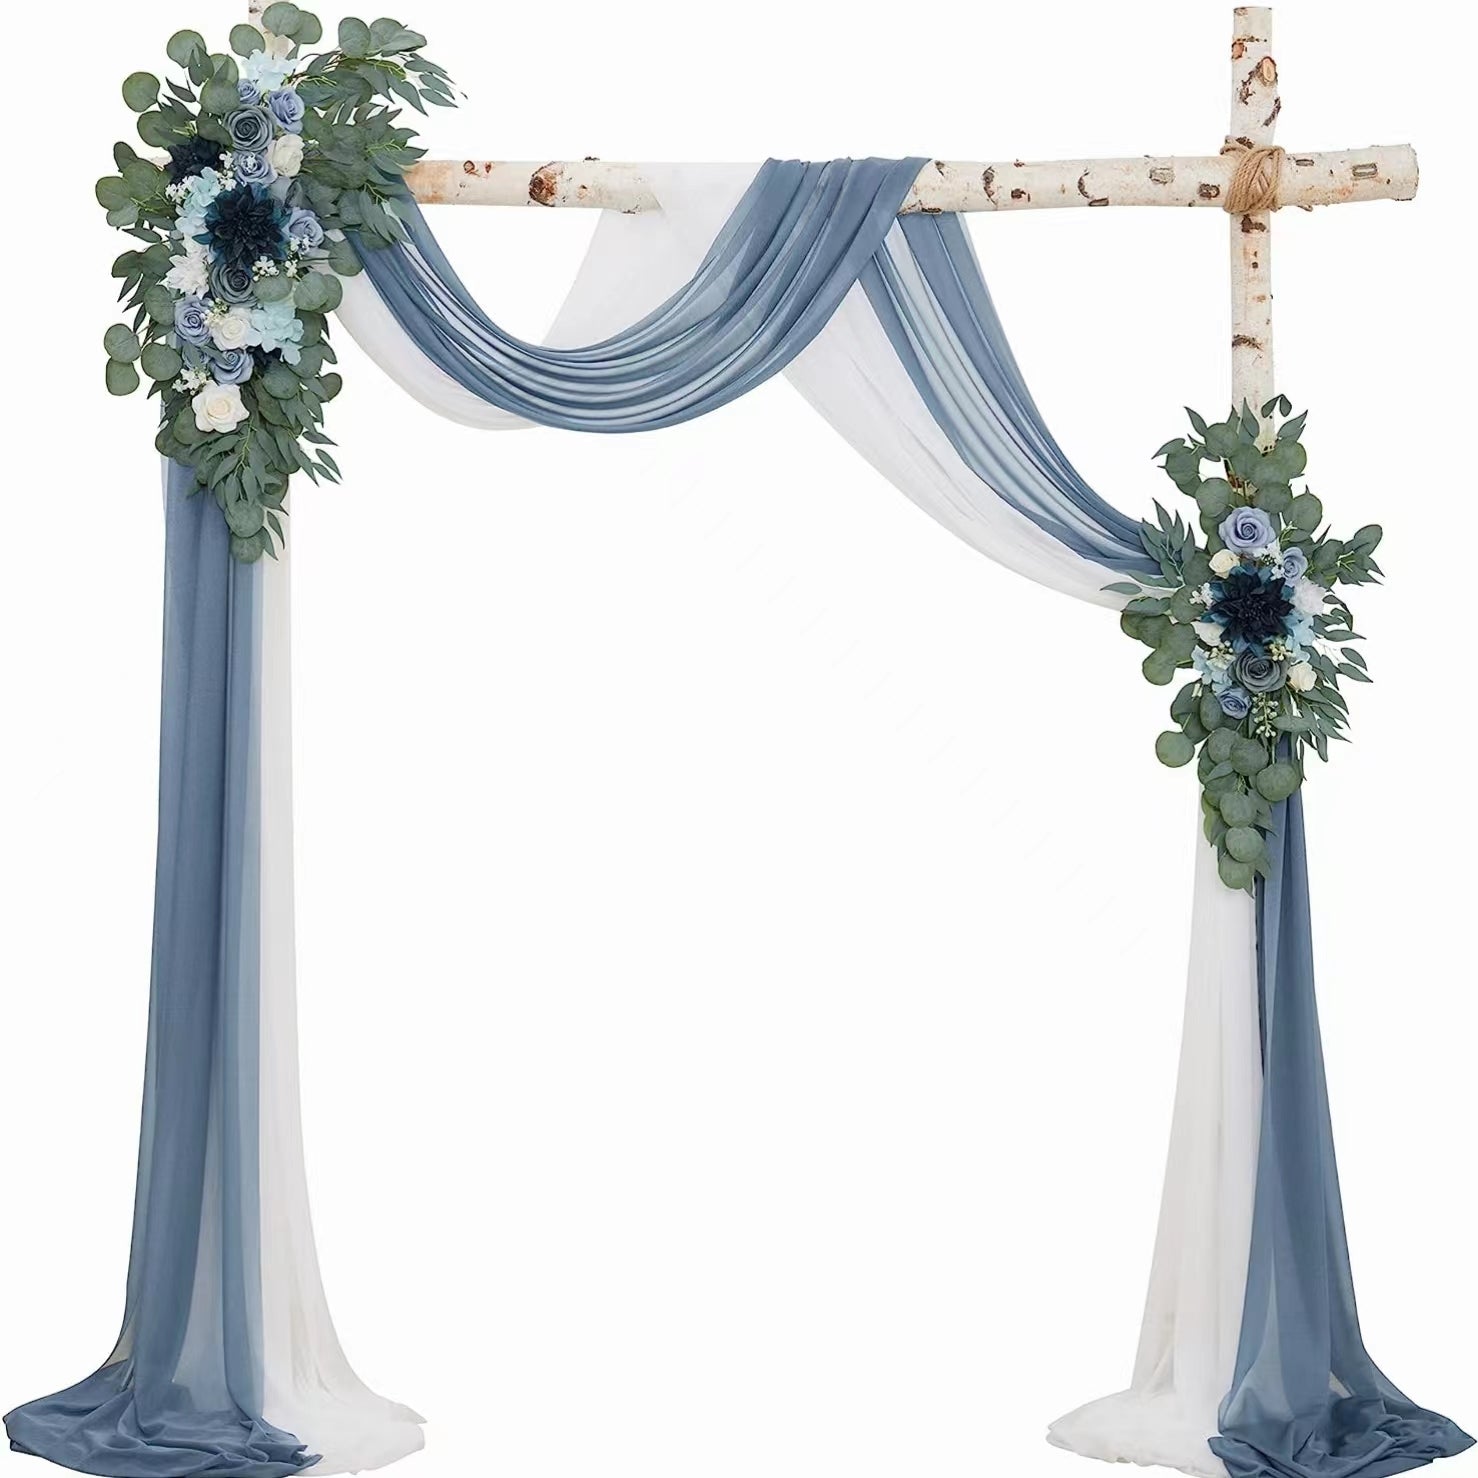 Rose morning Y001: Wedding Arch Floral and Curtain Set (Pack of 4) is a beautiful set of floral and curtains to decorate your wedding arch. The floral arrangements consist of roses, orchids, daisies and other flowers, and the curtains are made of elegant white tulle. This set is the perfect way to create a romantic and beautiful wedding venue.